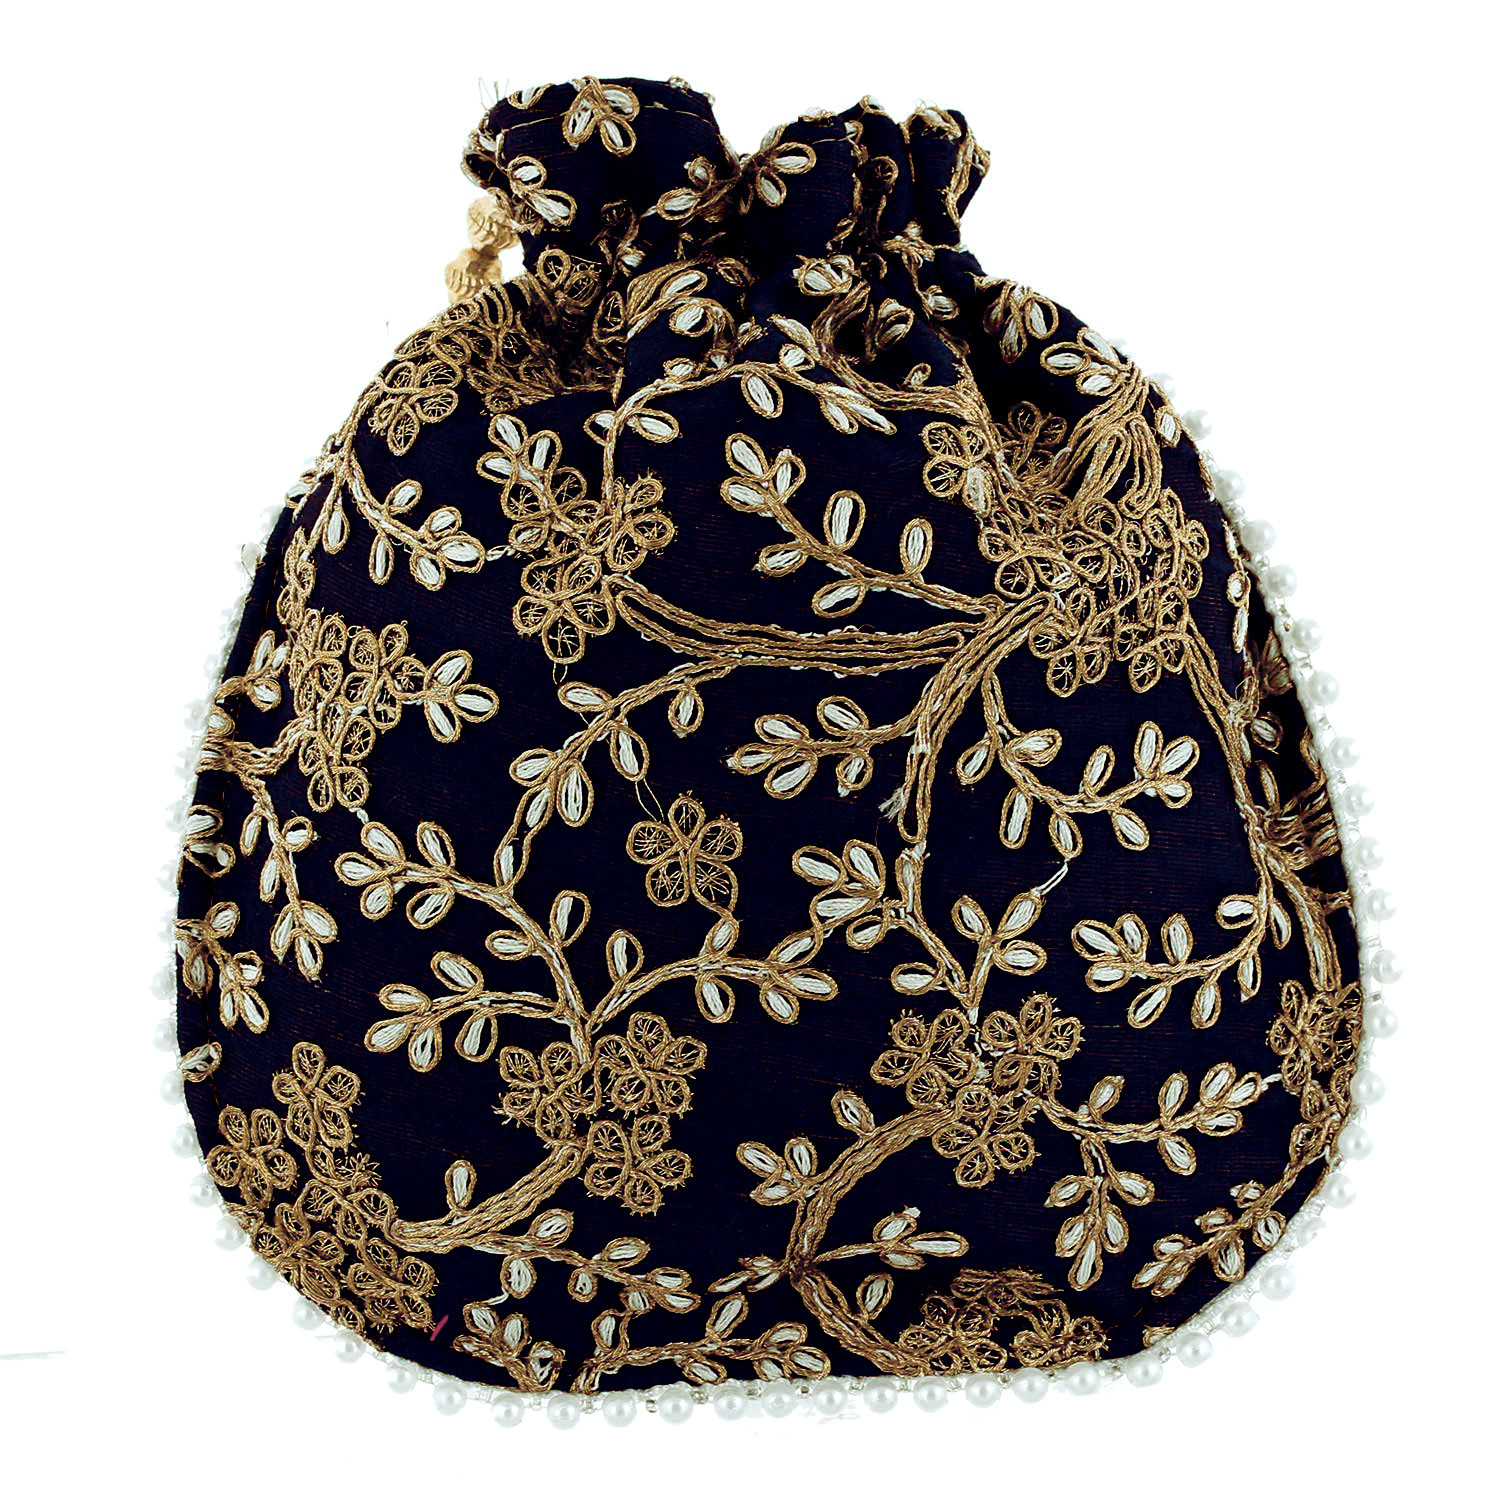 Kuber Industries Embroidery Drawstring Potli|Hand Purse With Gold Pearl Border & Handle For Woman,Girls (Black)